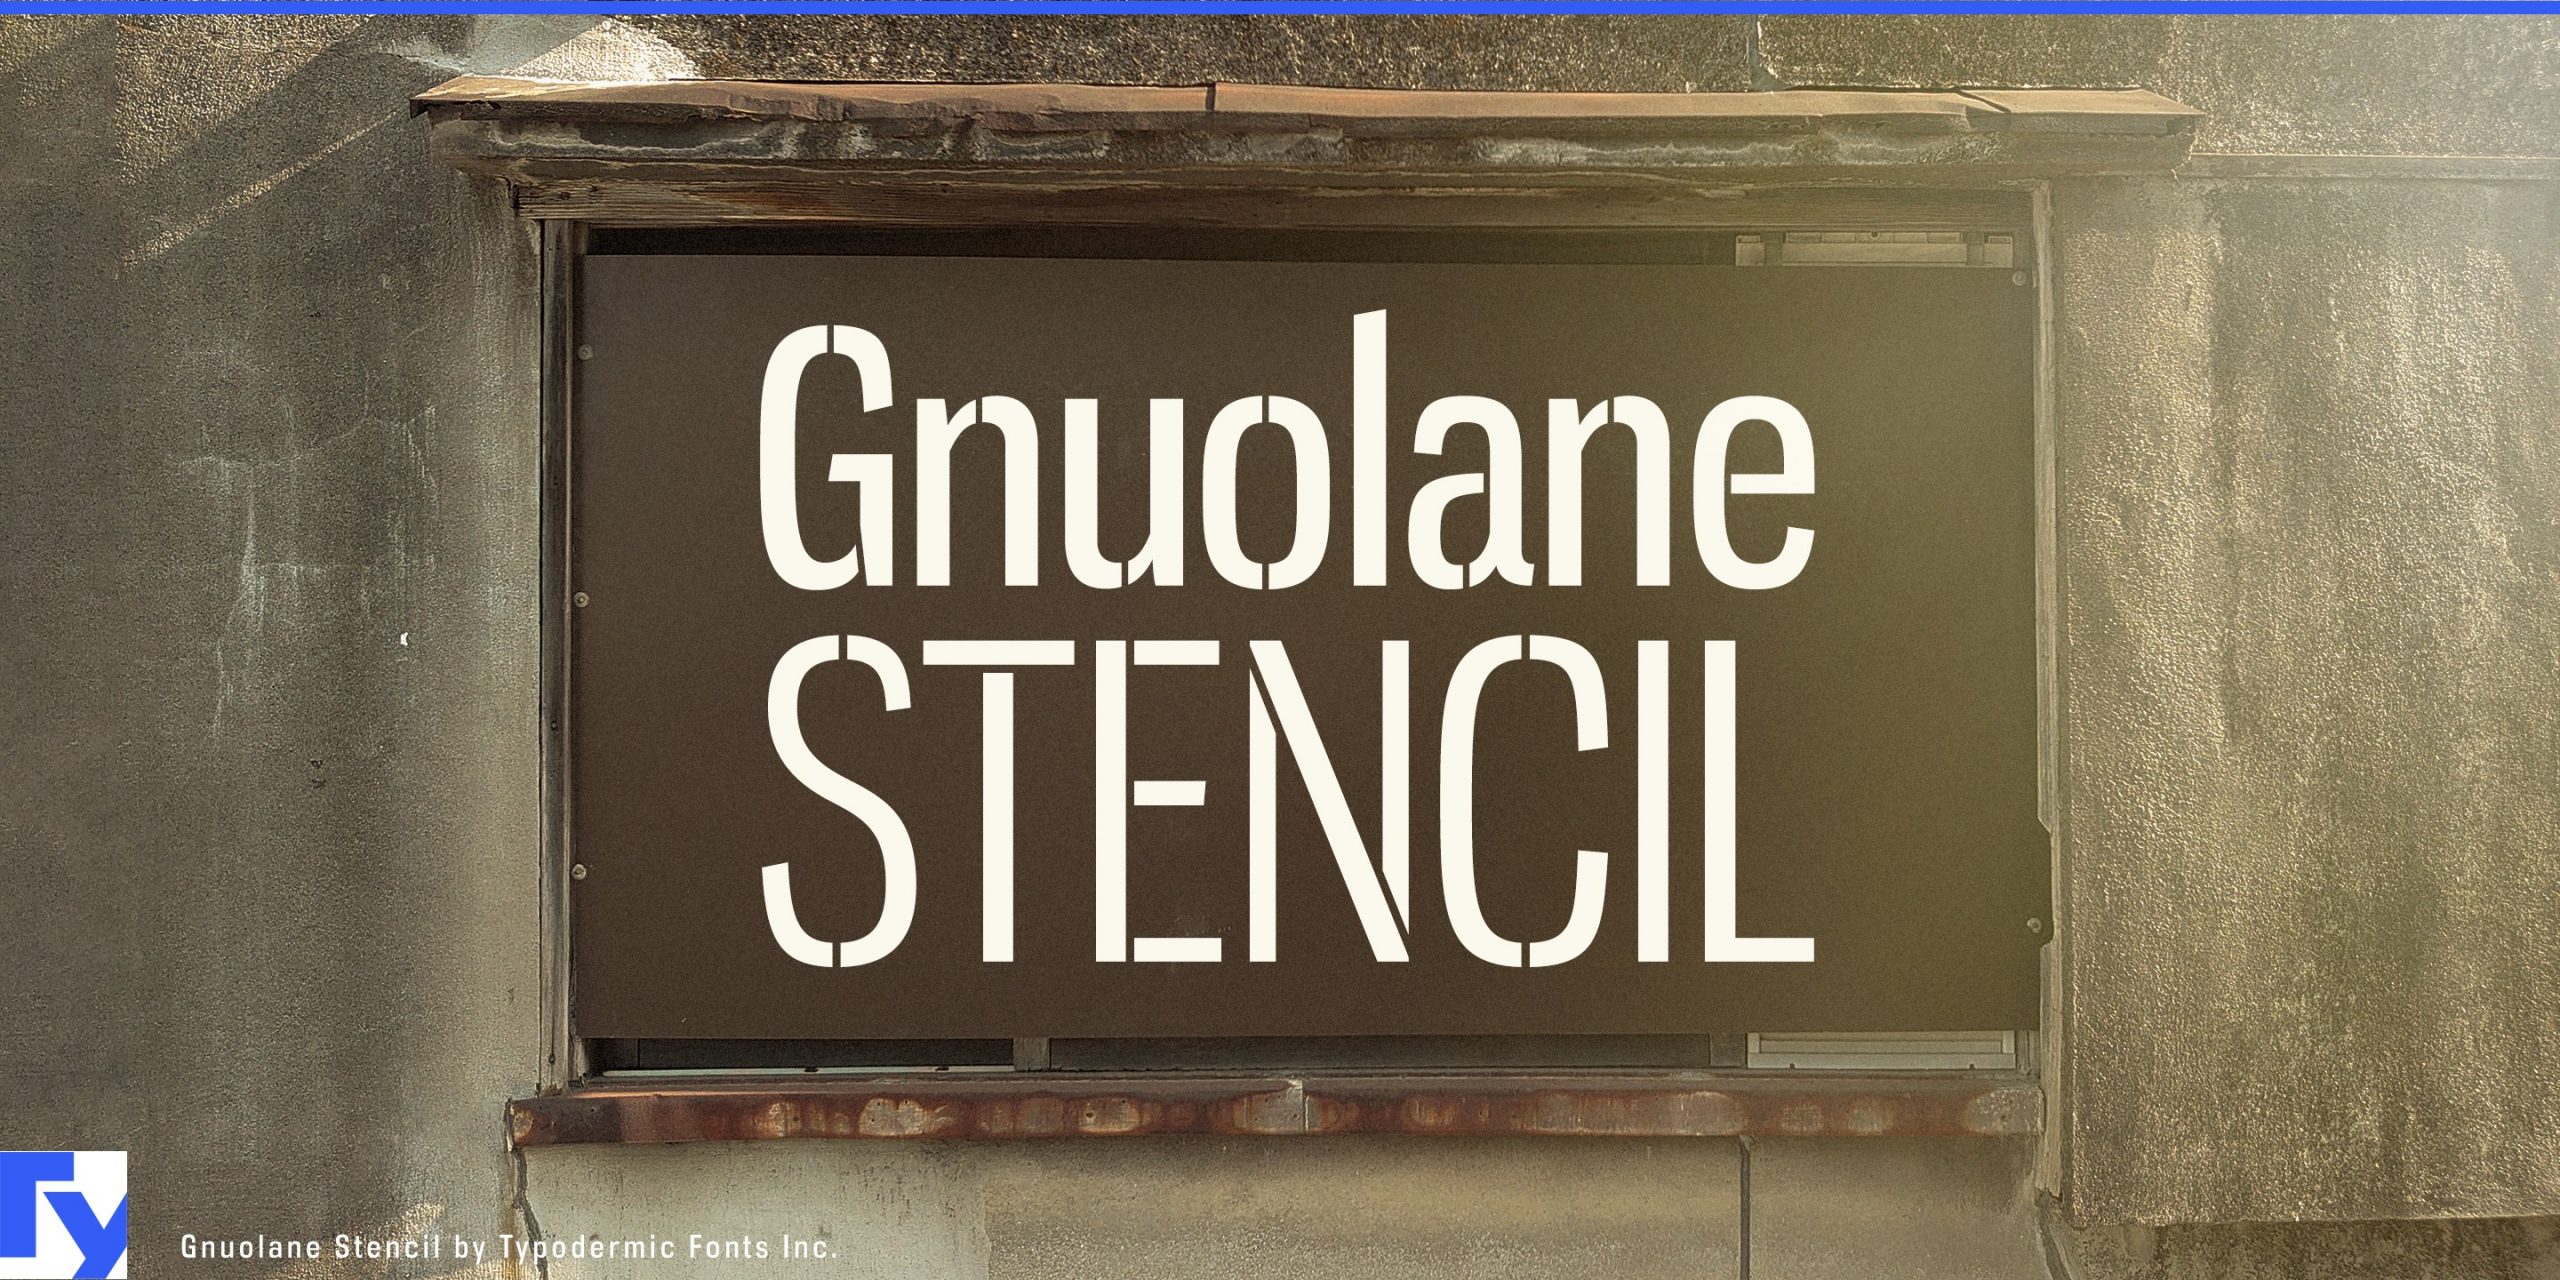 Cool and Sleek Lines: Discover the Captivating Style of Gnuolane Stencil Typeface